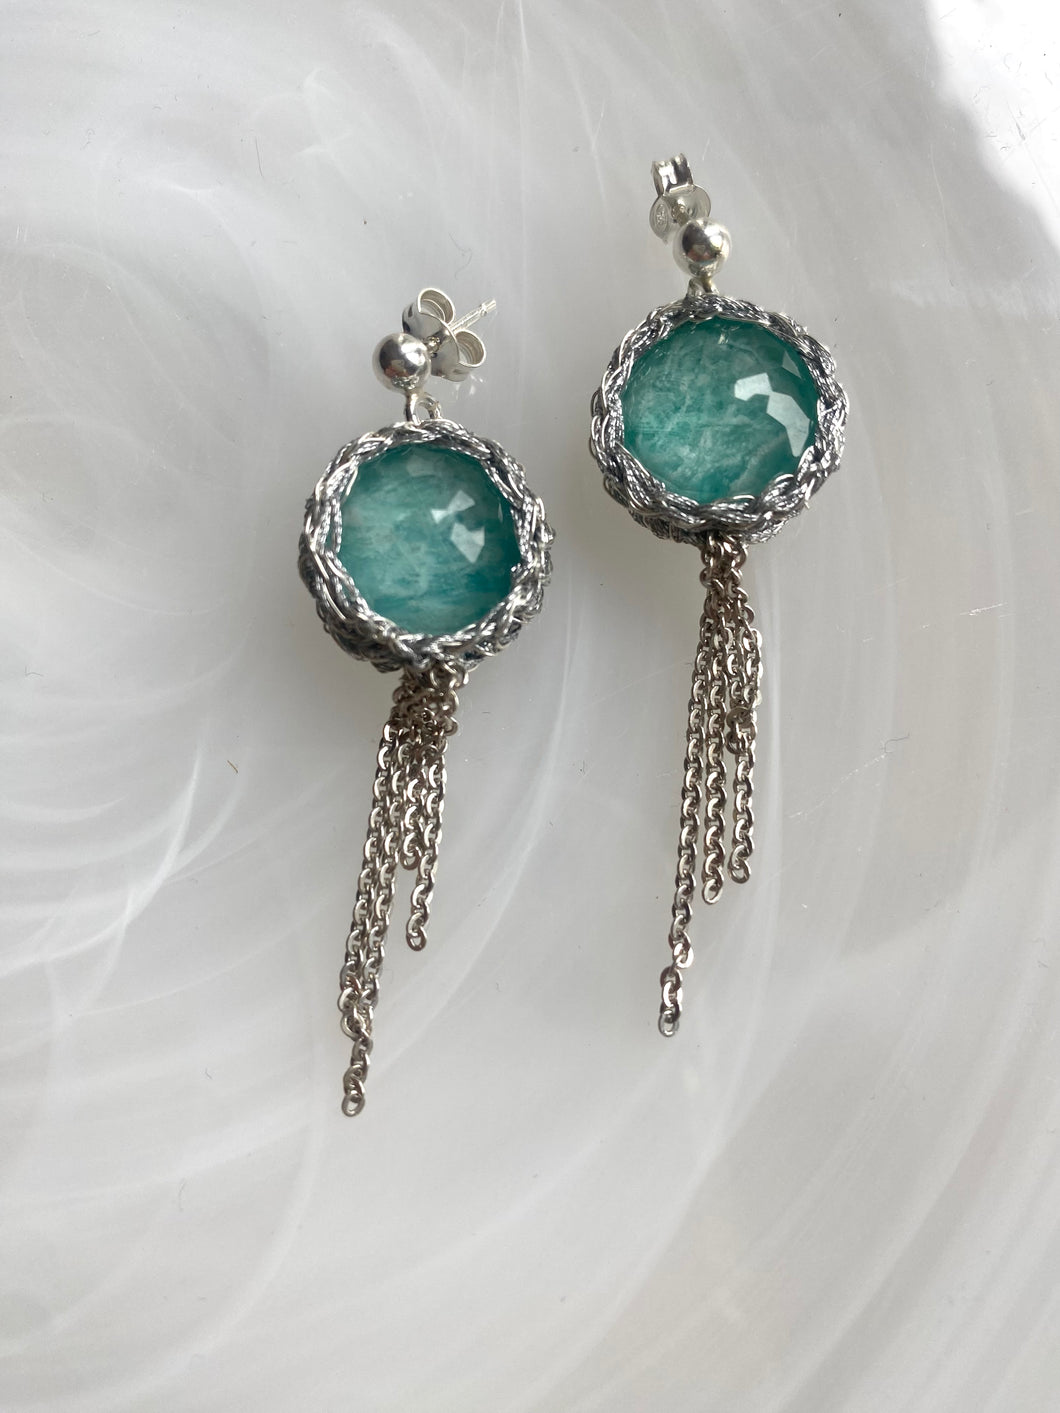 Apatite drops with silver chain earrings